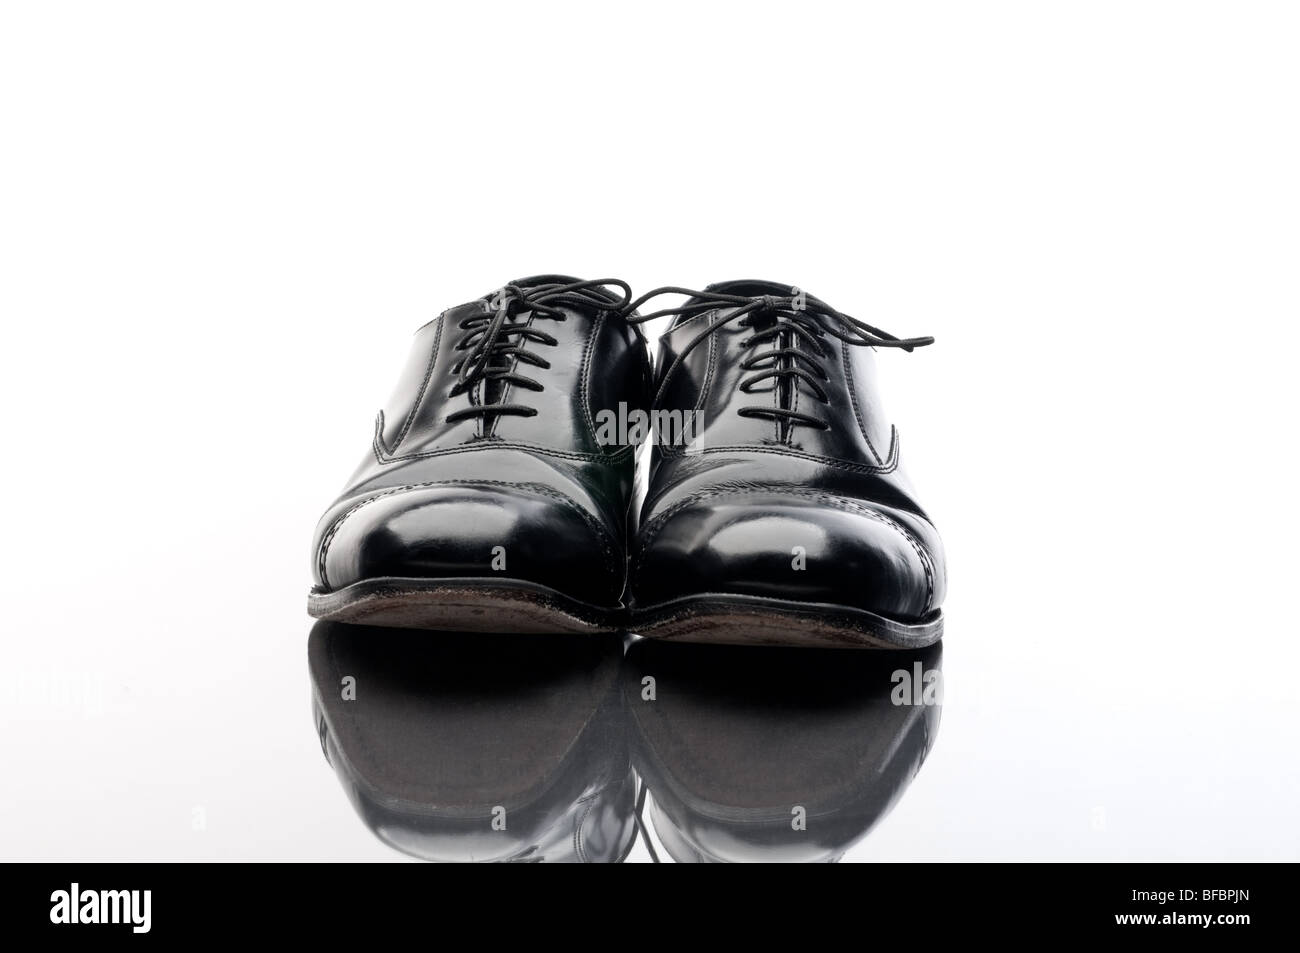 Black leather business shoes on a reflective surface Stock Photo